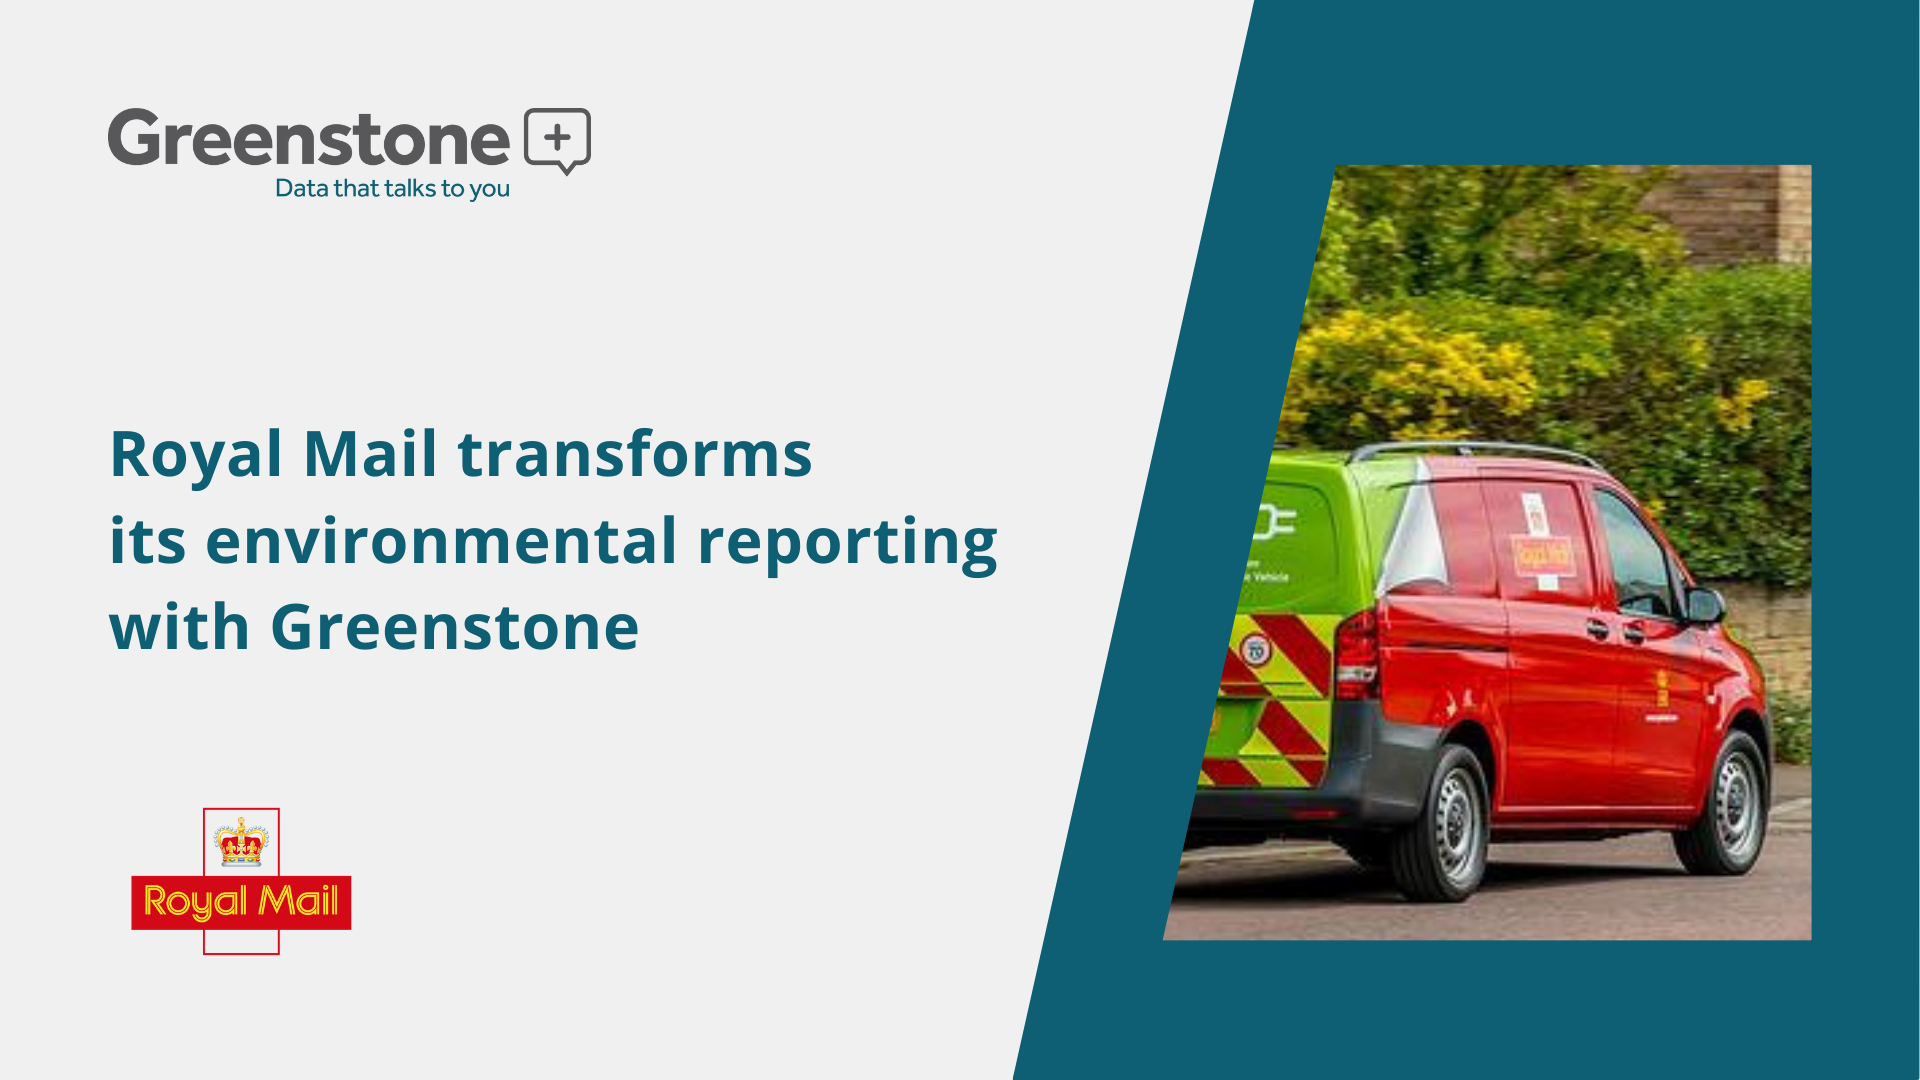 Royal Mail transforms its environmental reporting with Greenstone